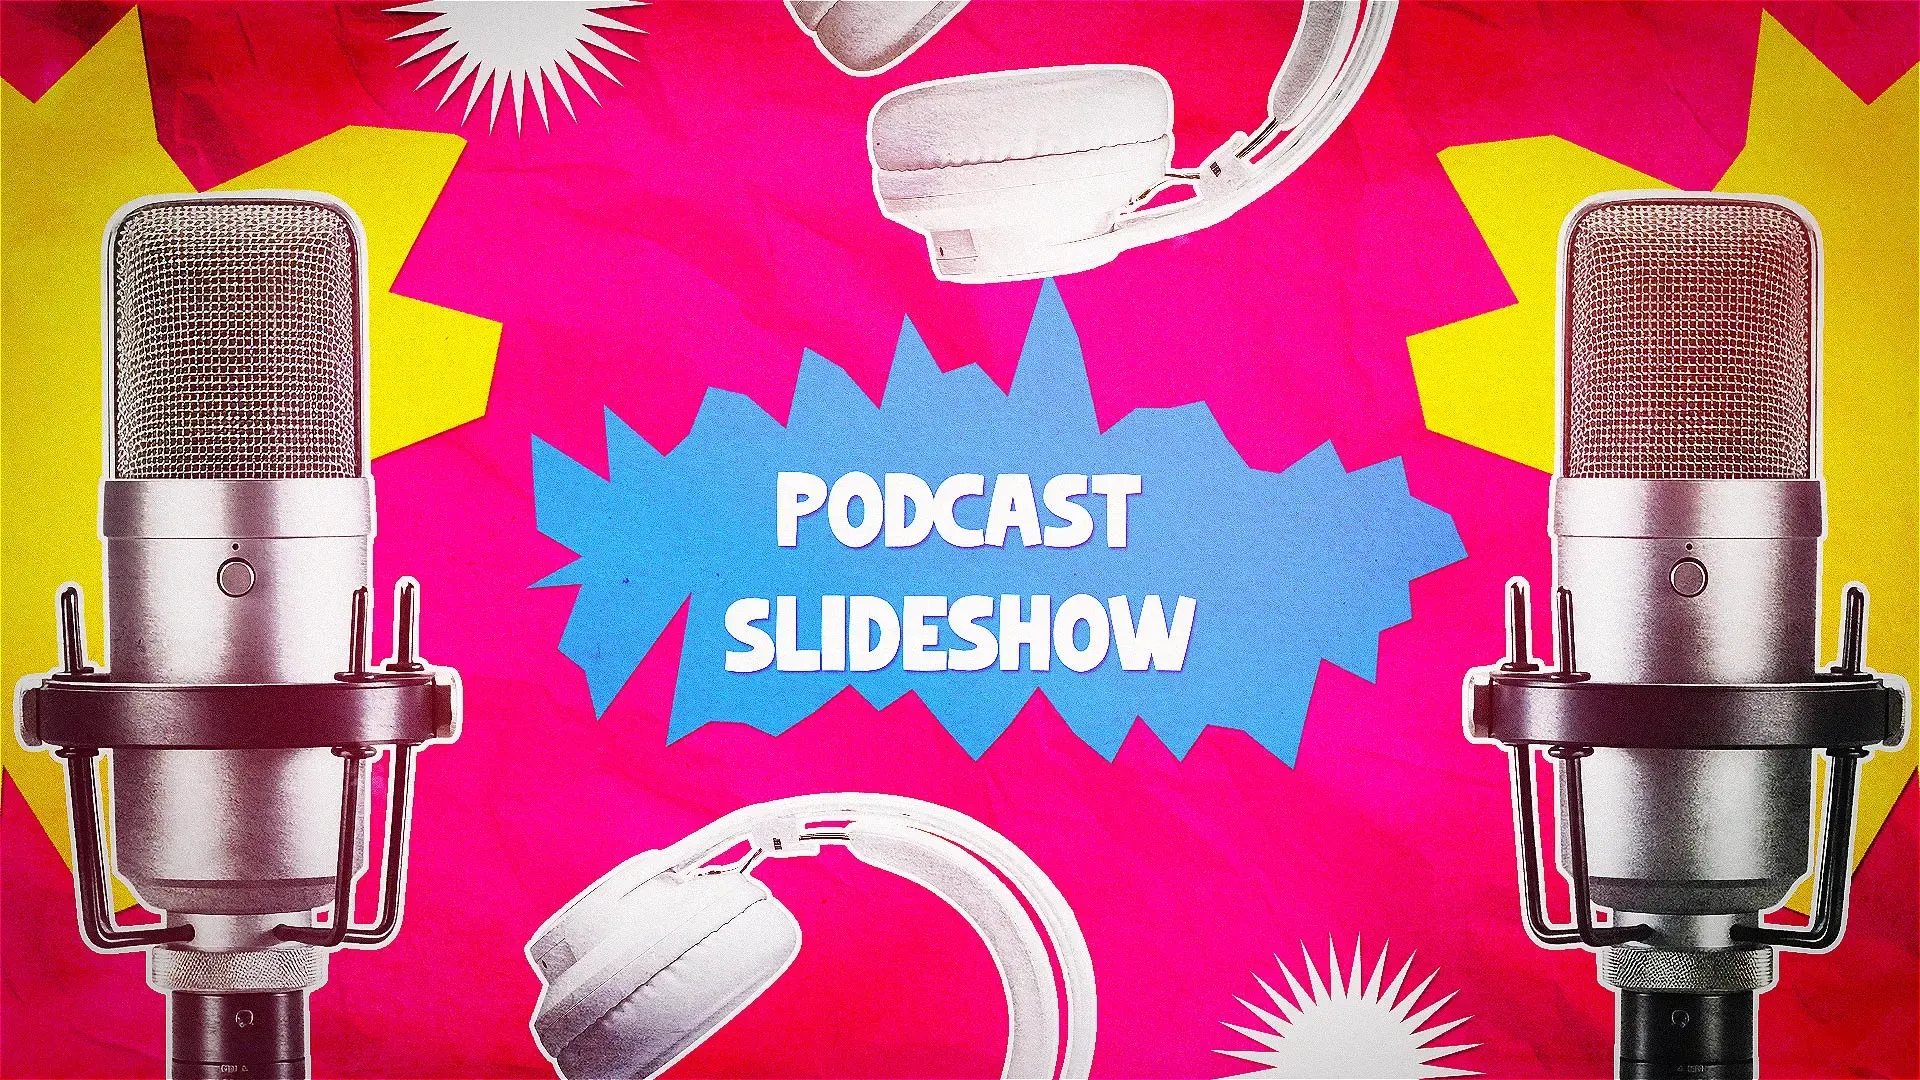 Funky Podcast Slideshow Template